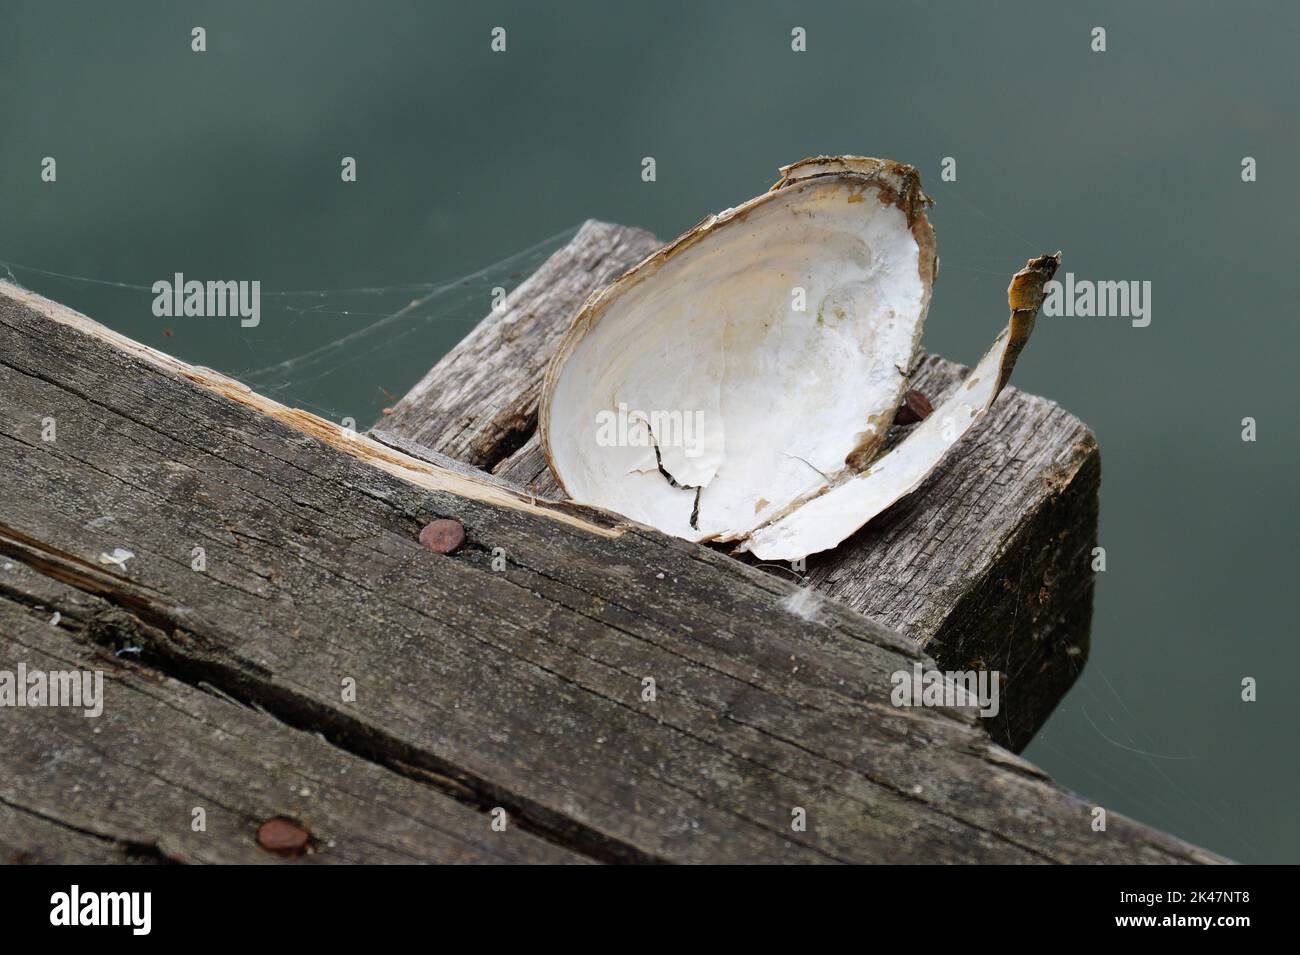 Clam's shell on fishing deck Stock Photo